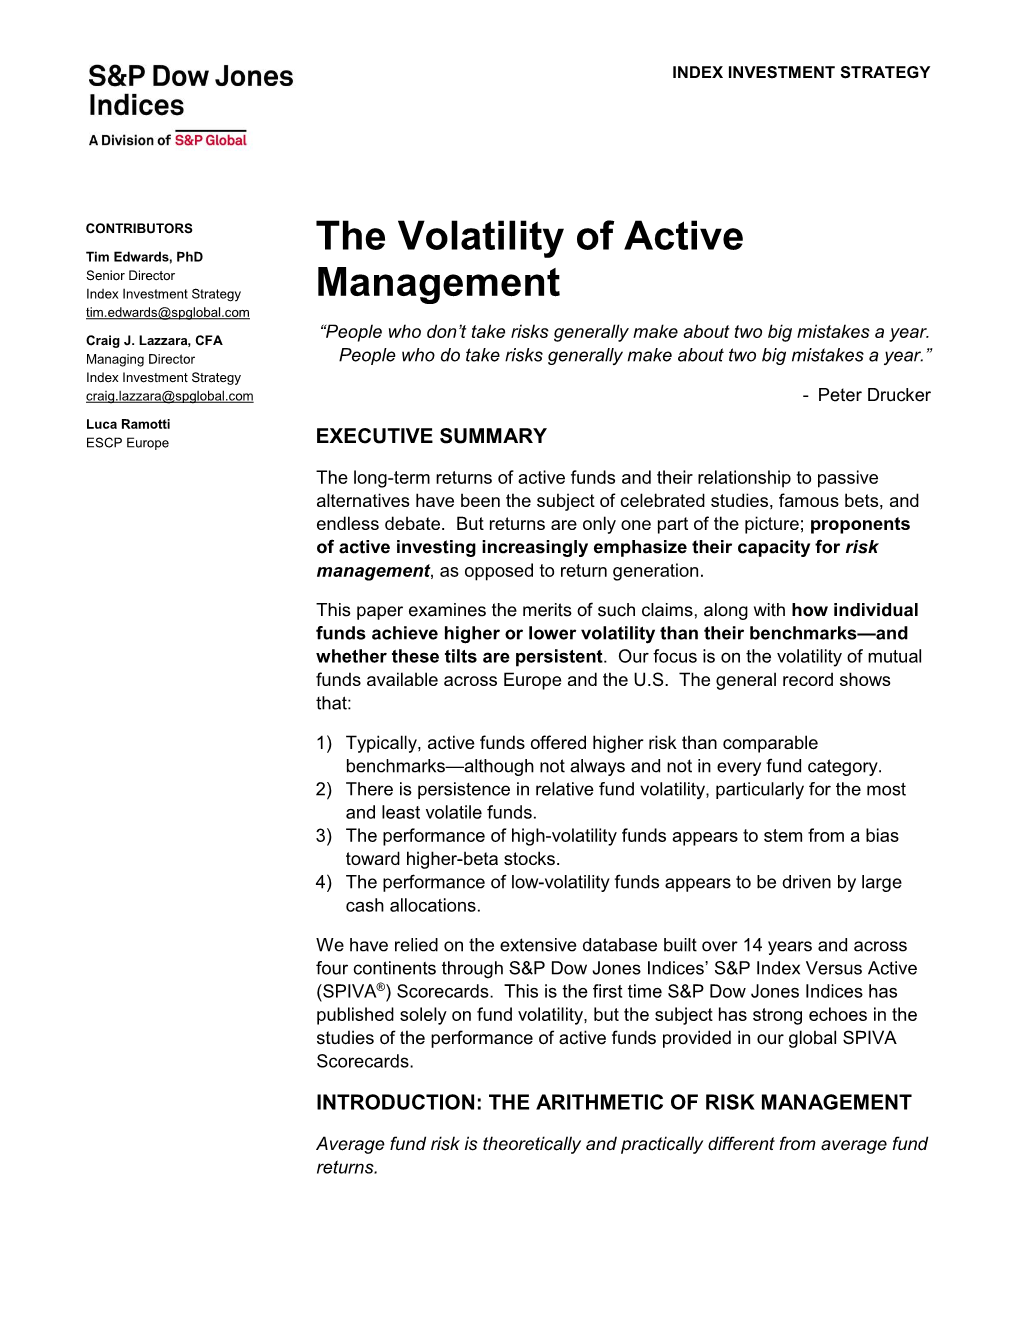 The Volatility of Active Management August 2016